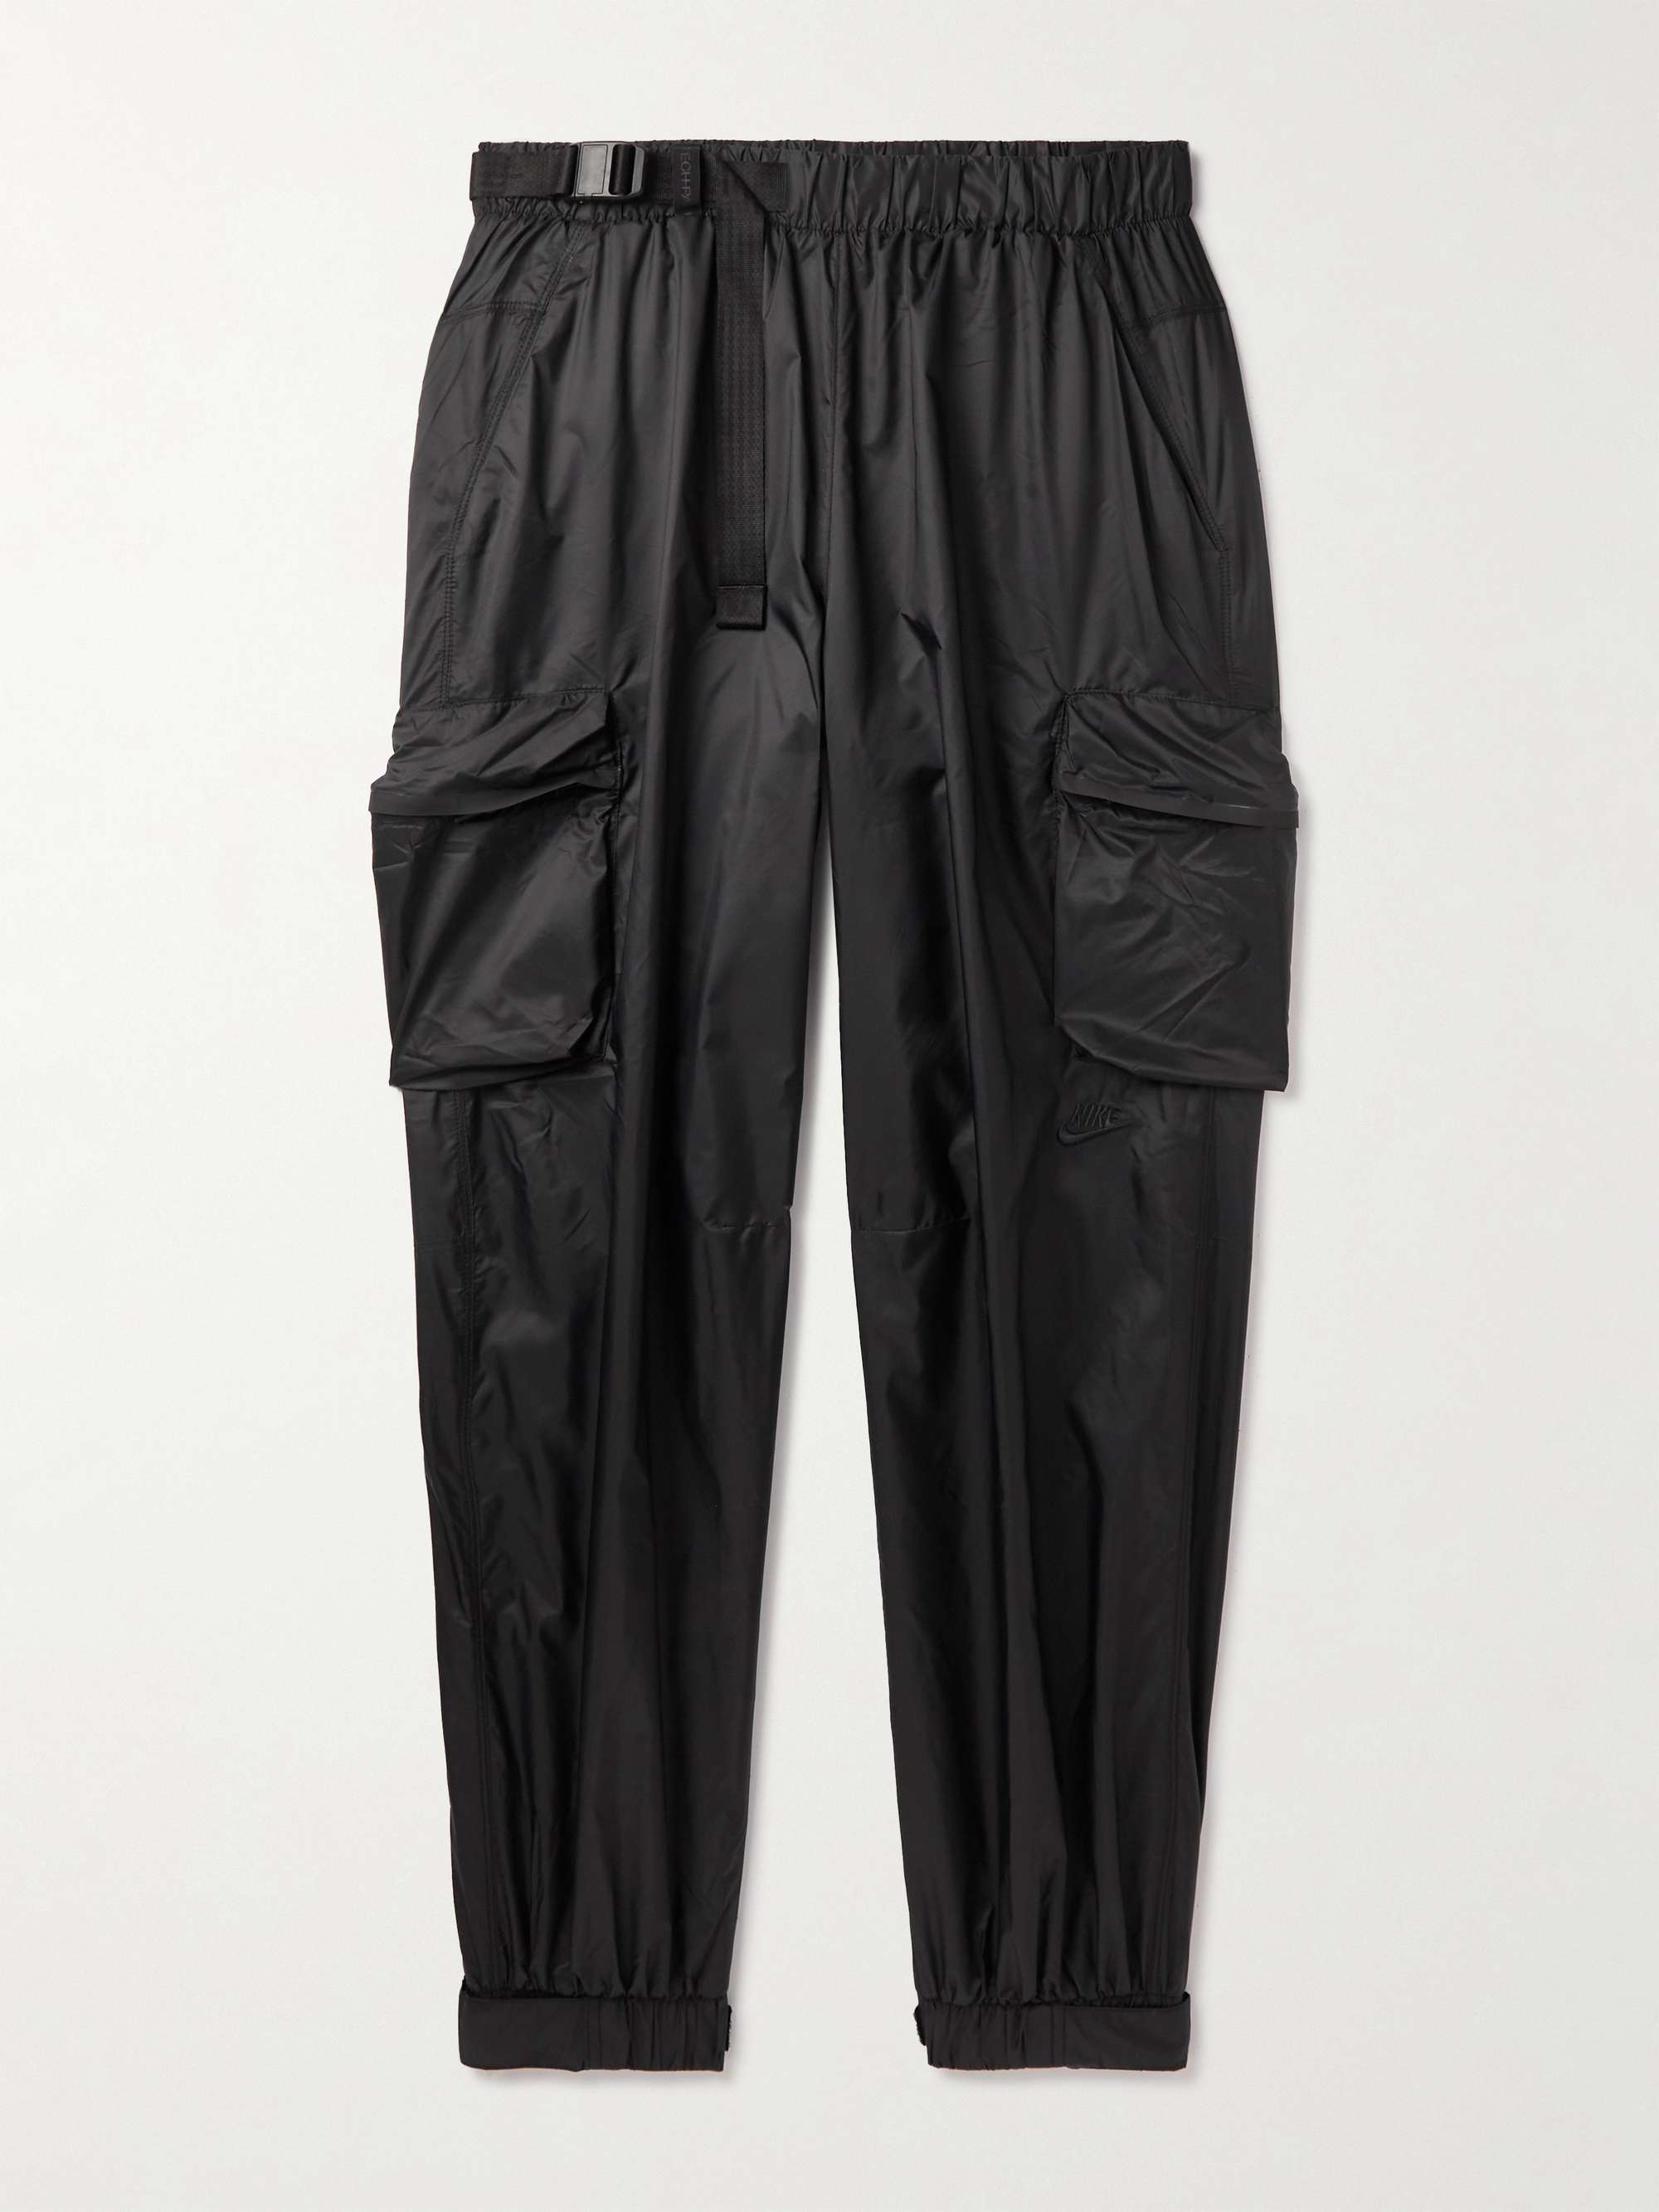 NIKE Sportswear Repel Tapered Belted Ripstop Cargo Sweatpants | MR PORTER